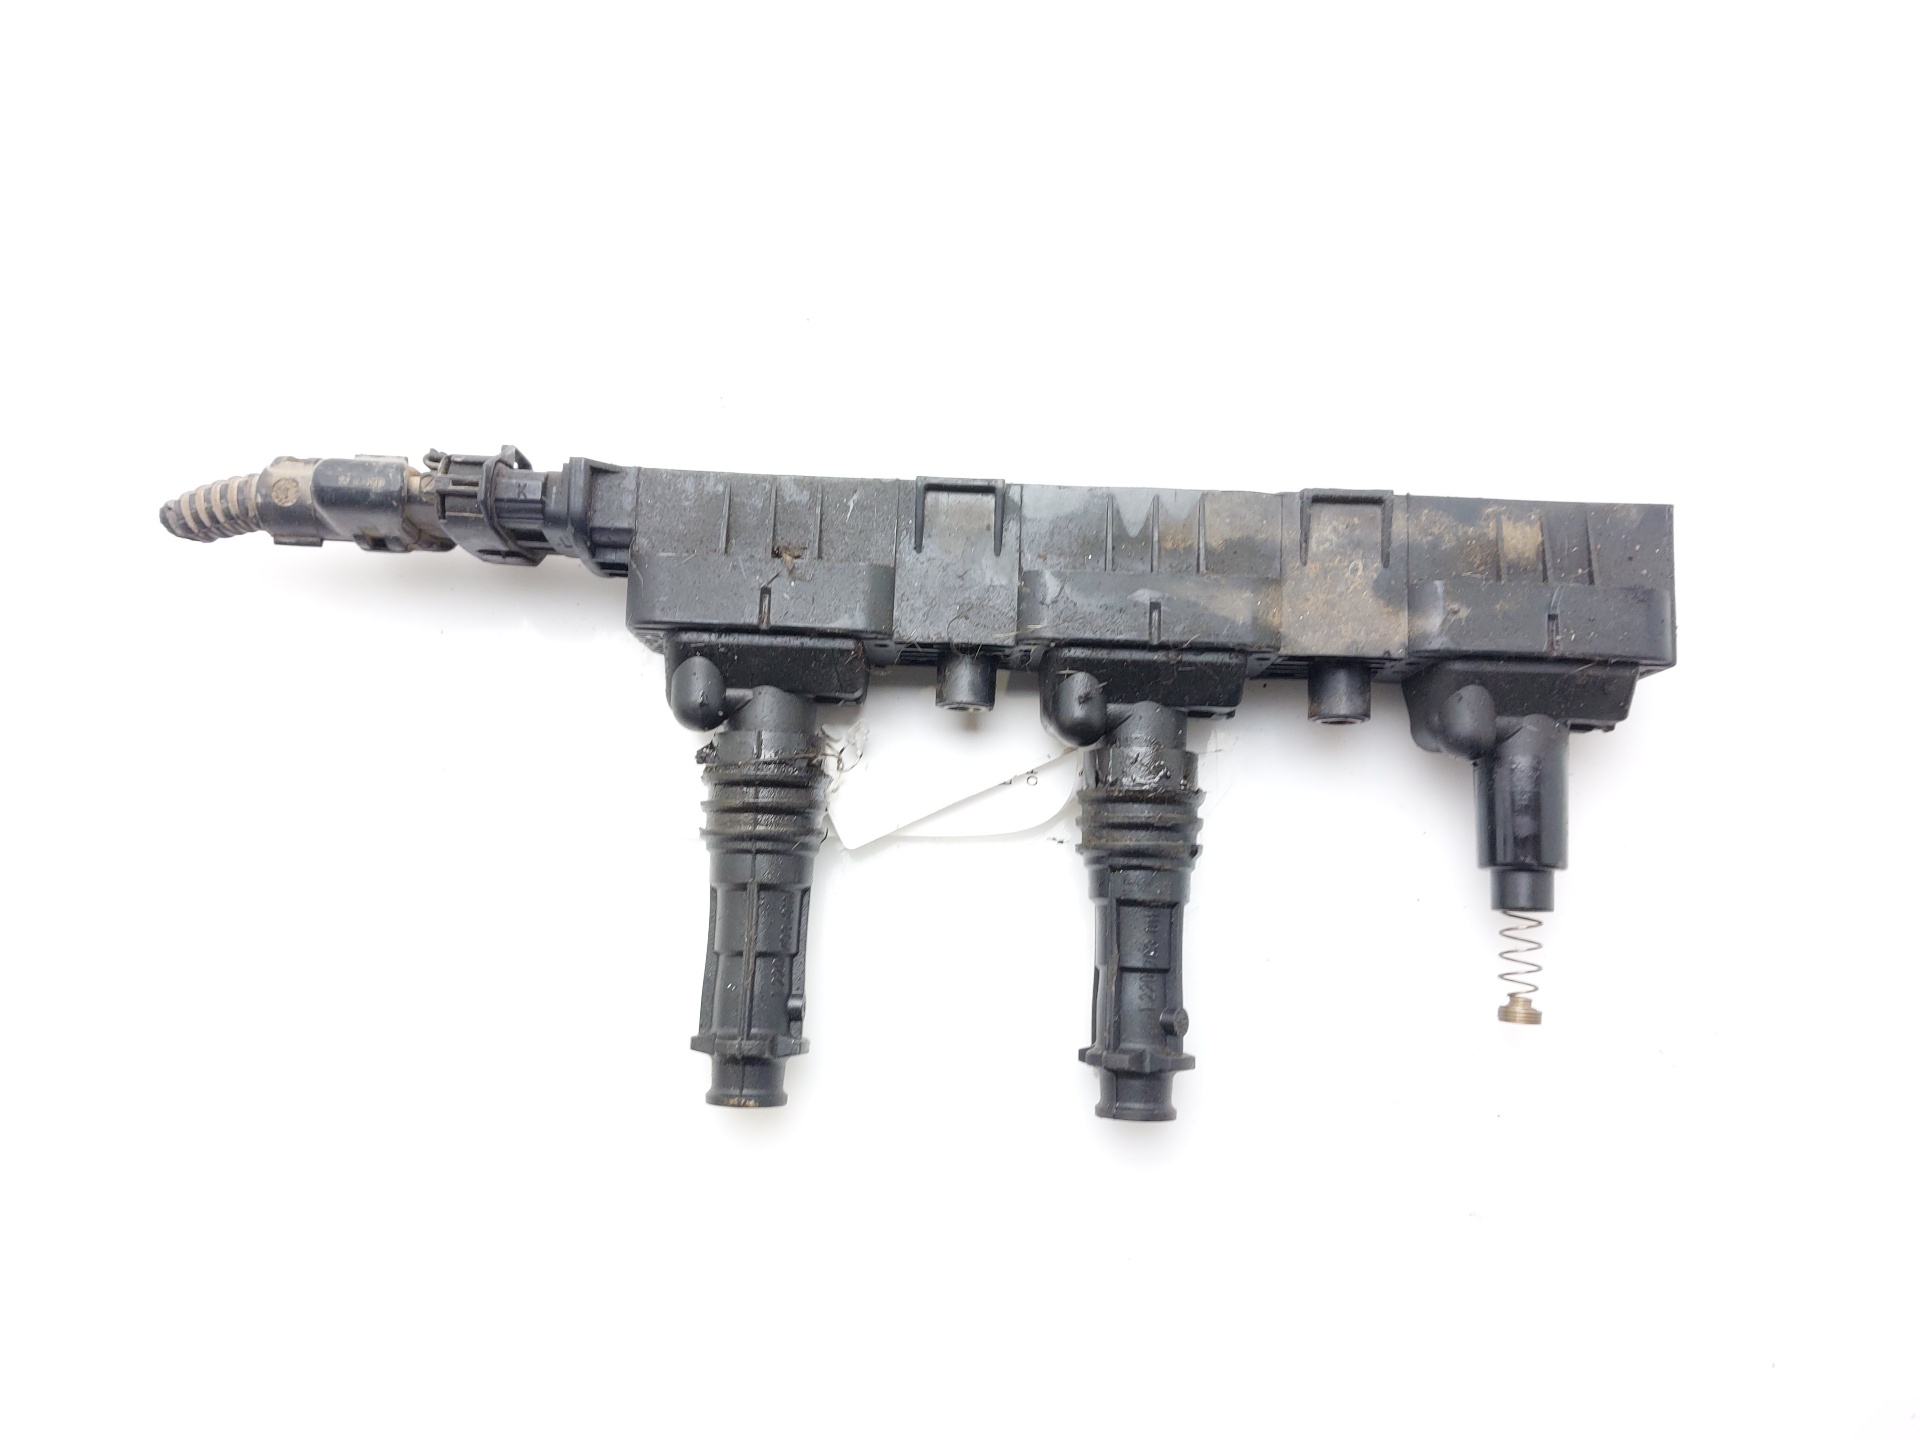 OPEL Corsa C (2000-2006) High Voltage Ignition Coil 0221503015 22541702